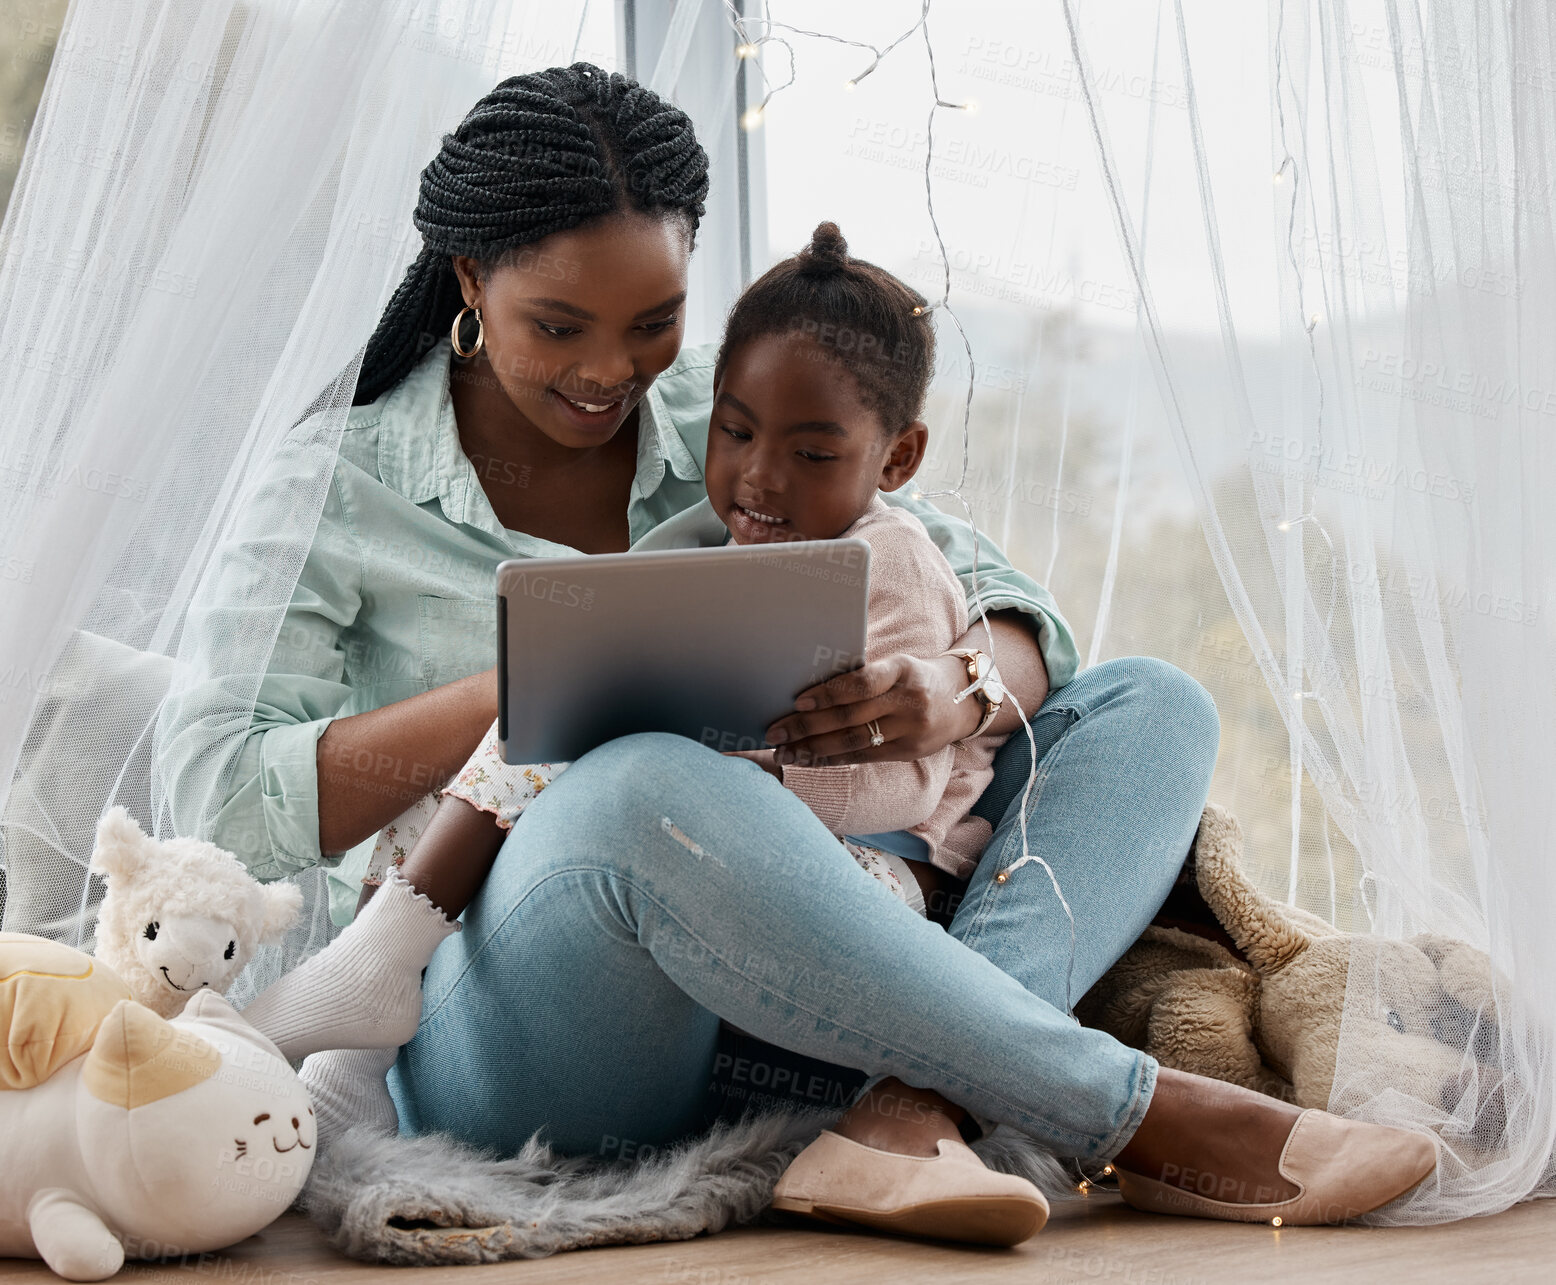 Buy stock photo Shot of a woman using a digital tablet while sitting with her daughter